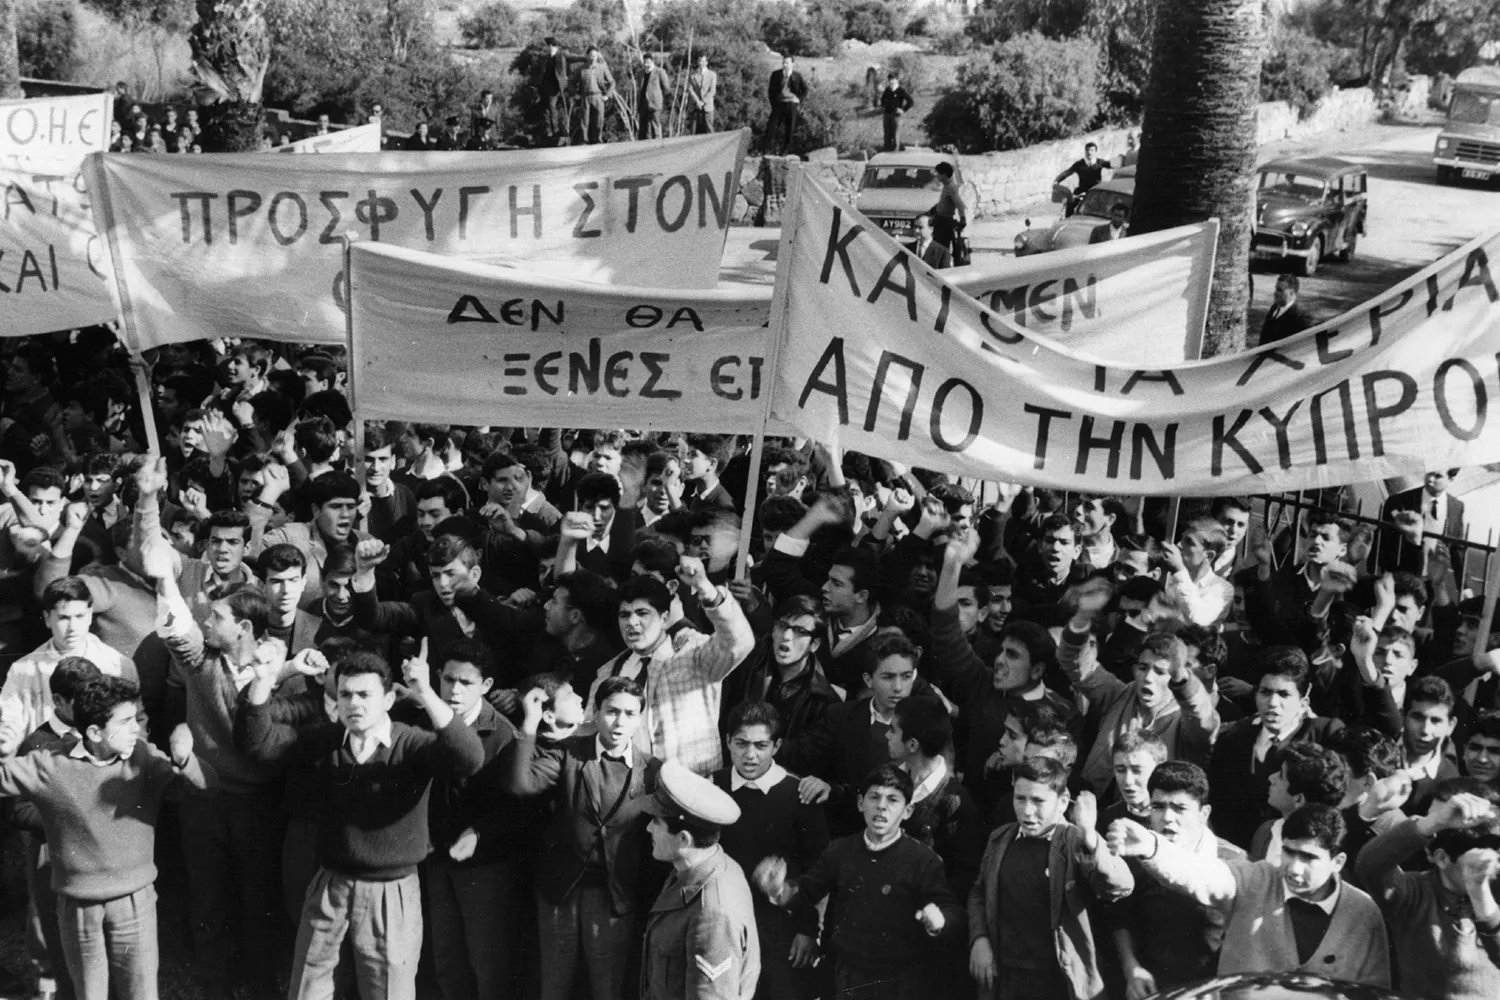 A crowd of Greek Cypriots participate in a communist-backed demonstration in this historic black-and-white image.